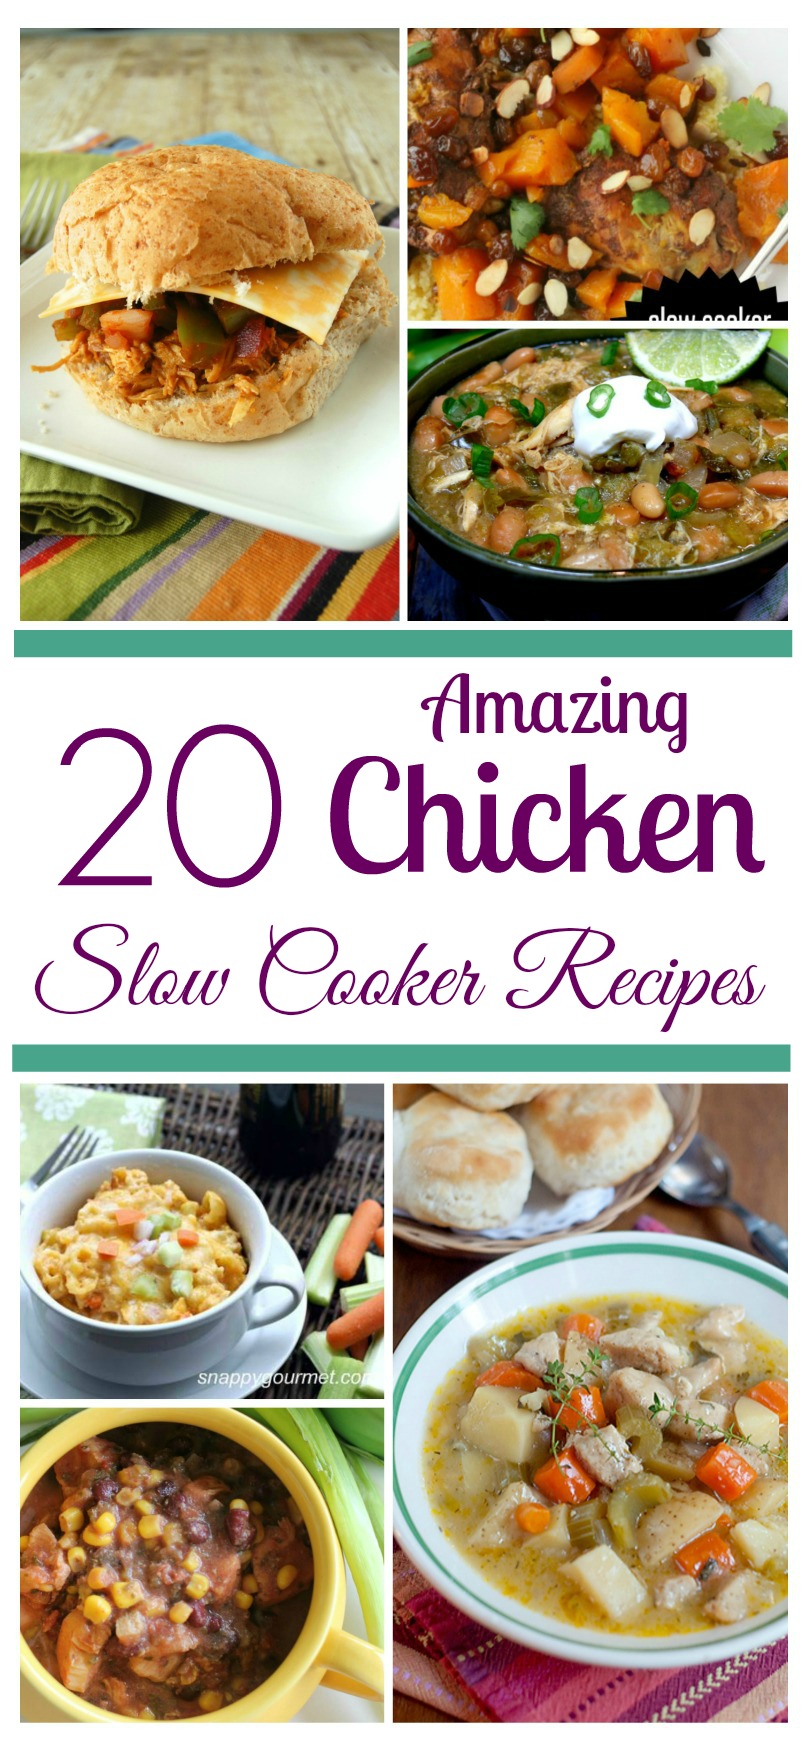 Looking for delicious chicken recipes for your slow cooker? Check out these 20 Amazing Chicken Slow Cooker Recipes that are perfect for any family!